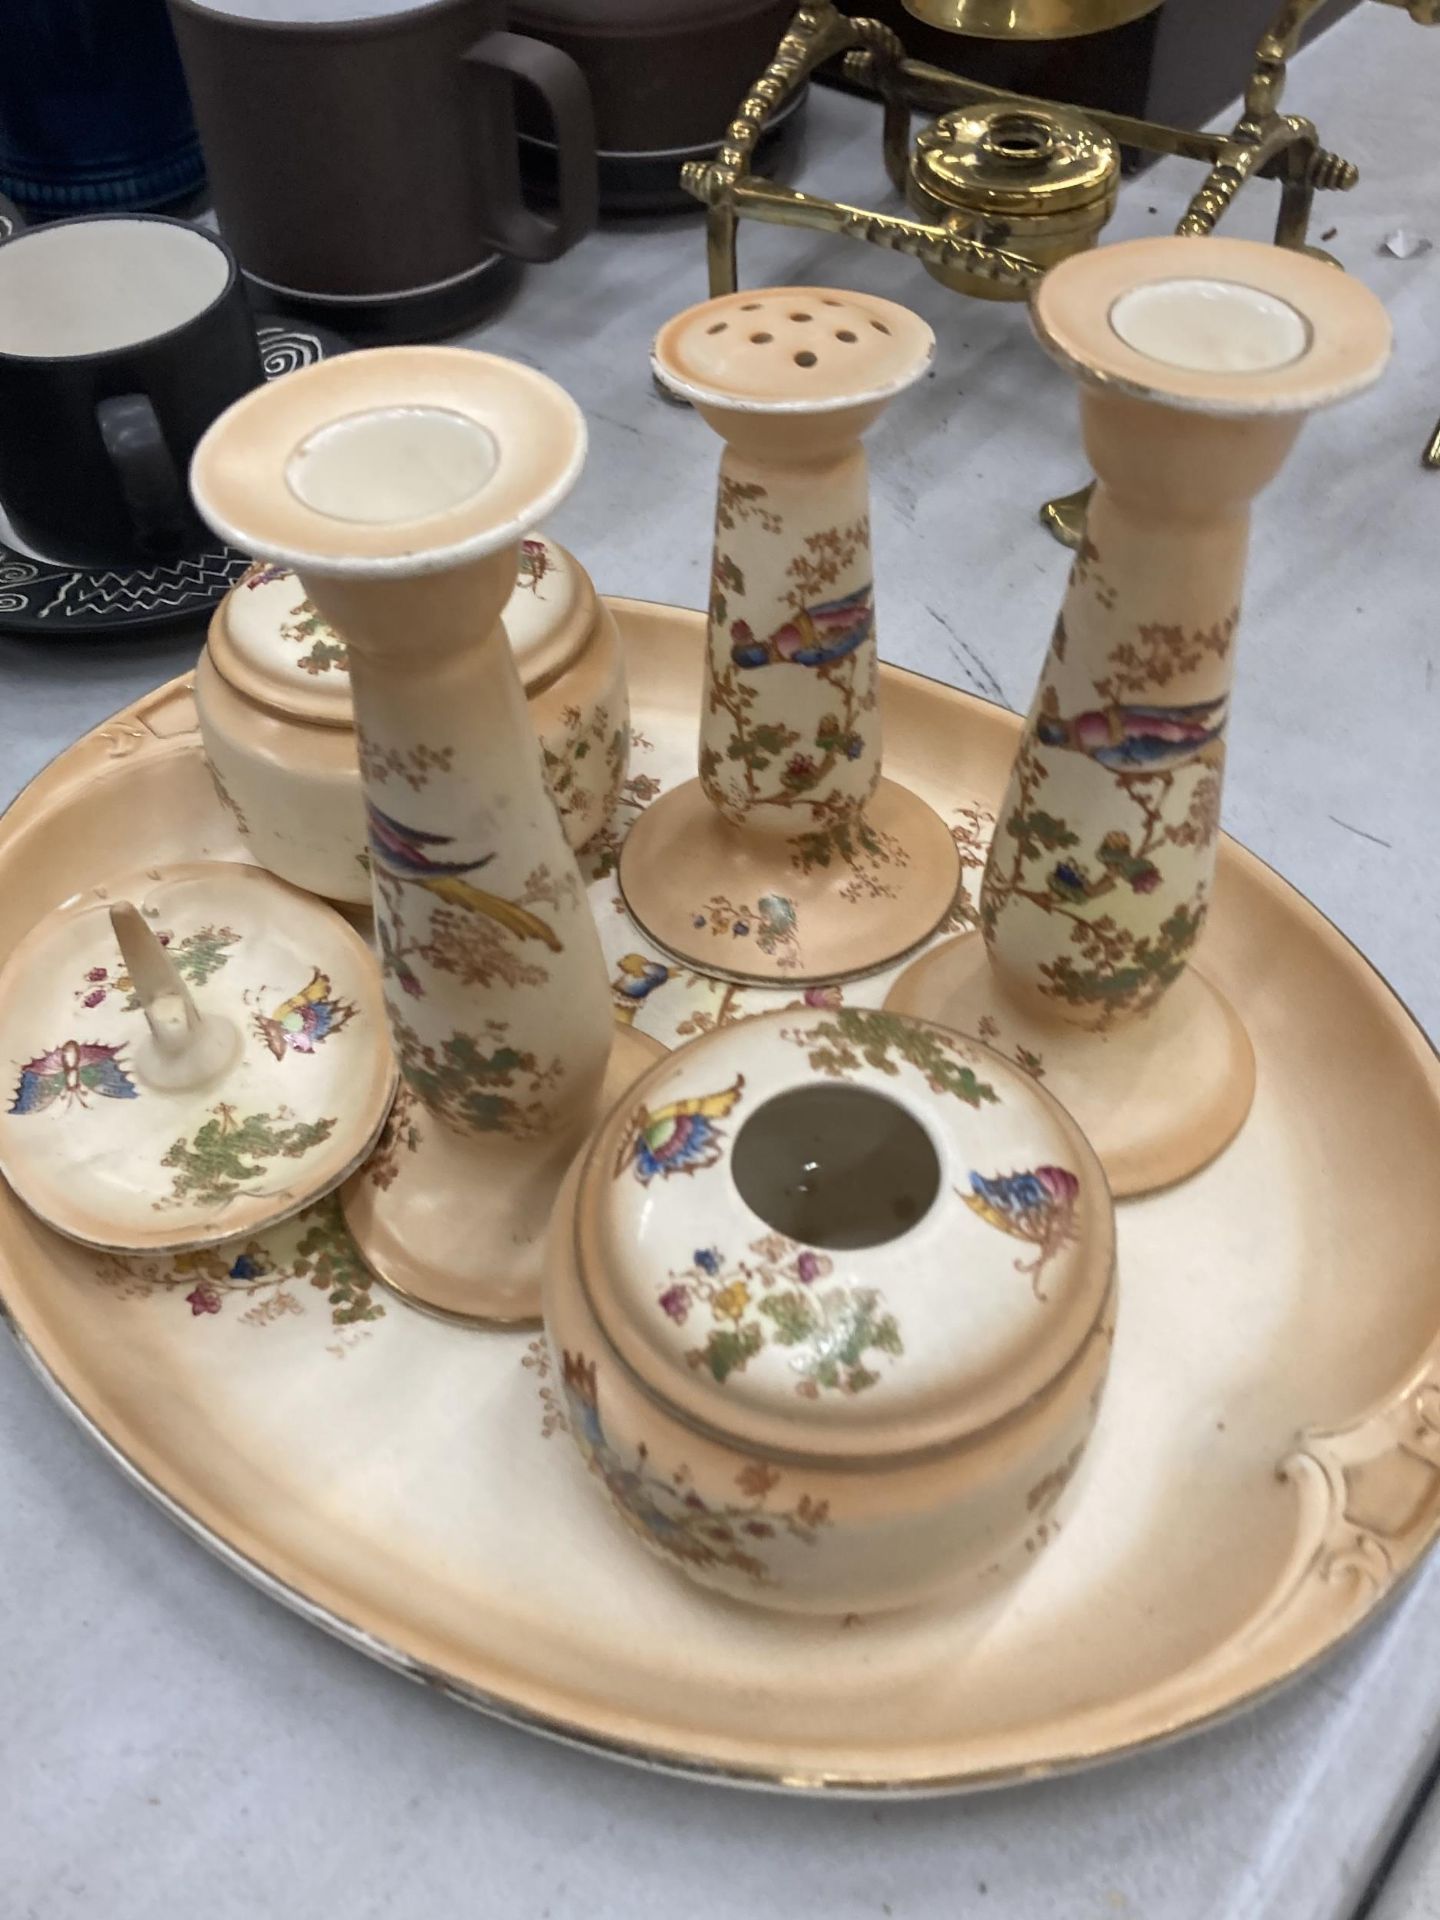 A VINTAGE CERAMIC DRESSING TABLE SET WITH BIRD AND FLORAL DESIGN - Image 4 of 4